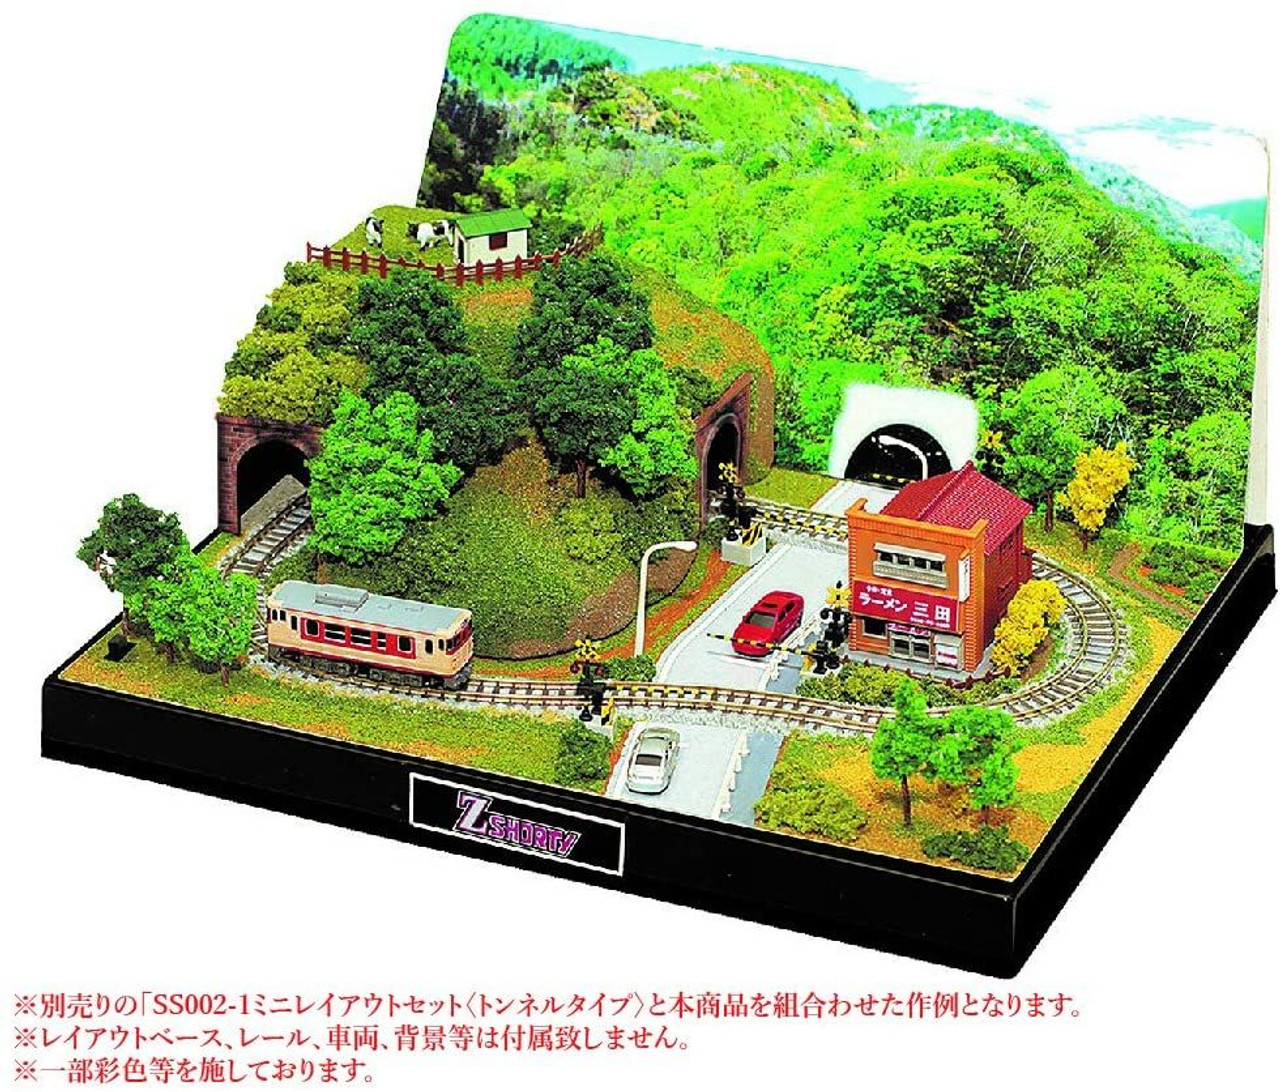 Rokuhan SS002-1 & SS002-2 Z Shorty Mini Layout Set & Exclusive Scene Set  (Tunnel Type) (Z scale)